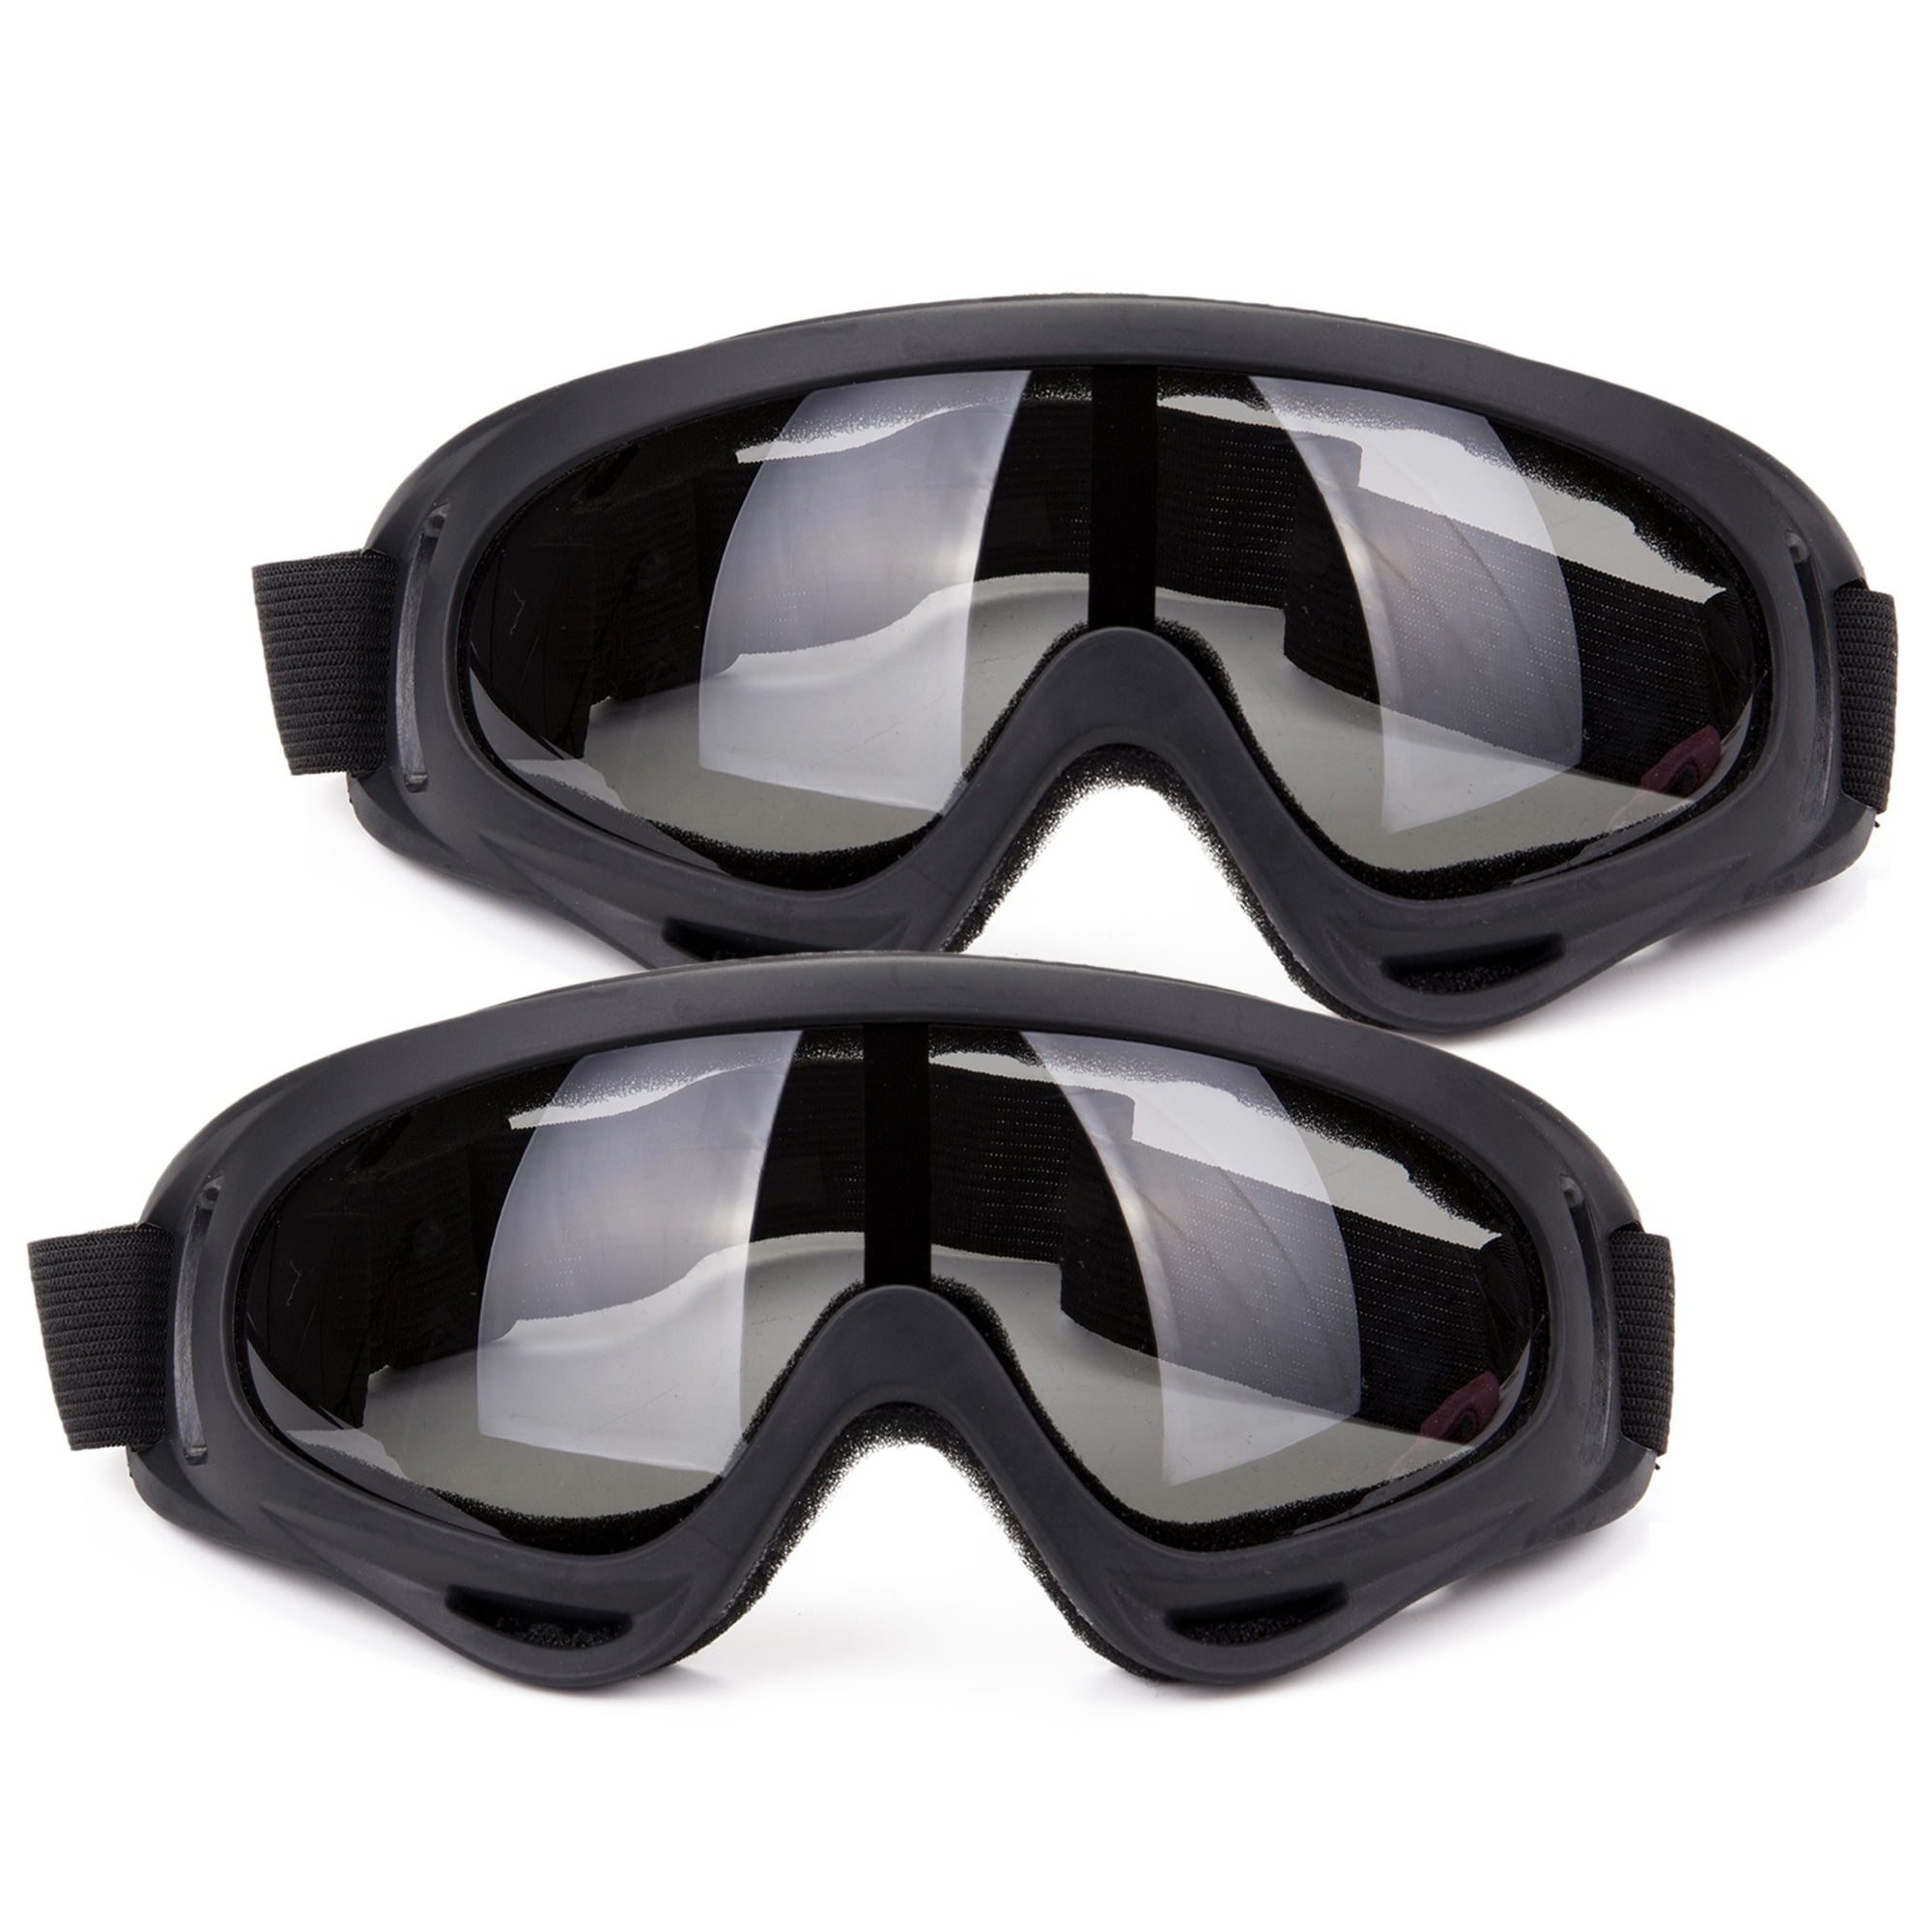 Dplus Ski Snowboard Snowbike Goggles Motorcycle Goggles Outdoor Sports Dust-Proof Glasses 